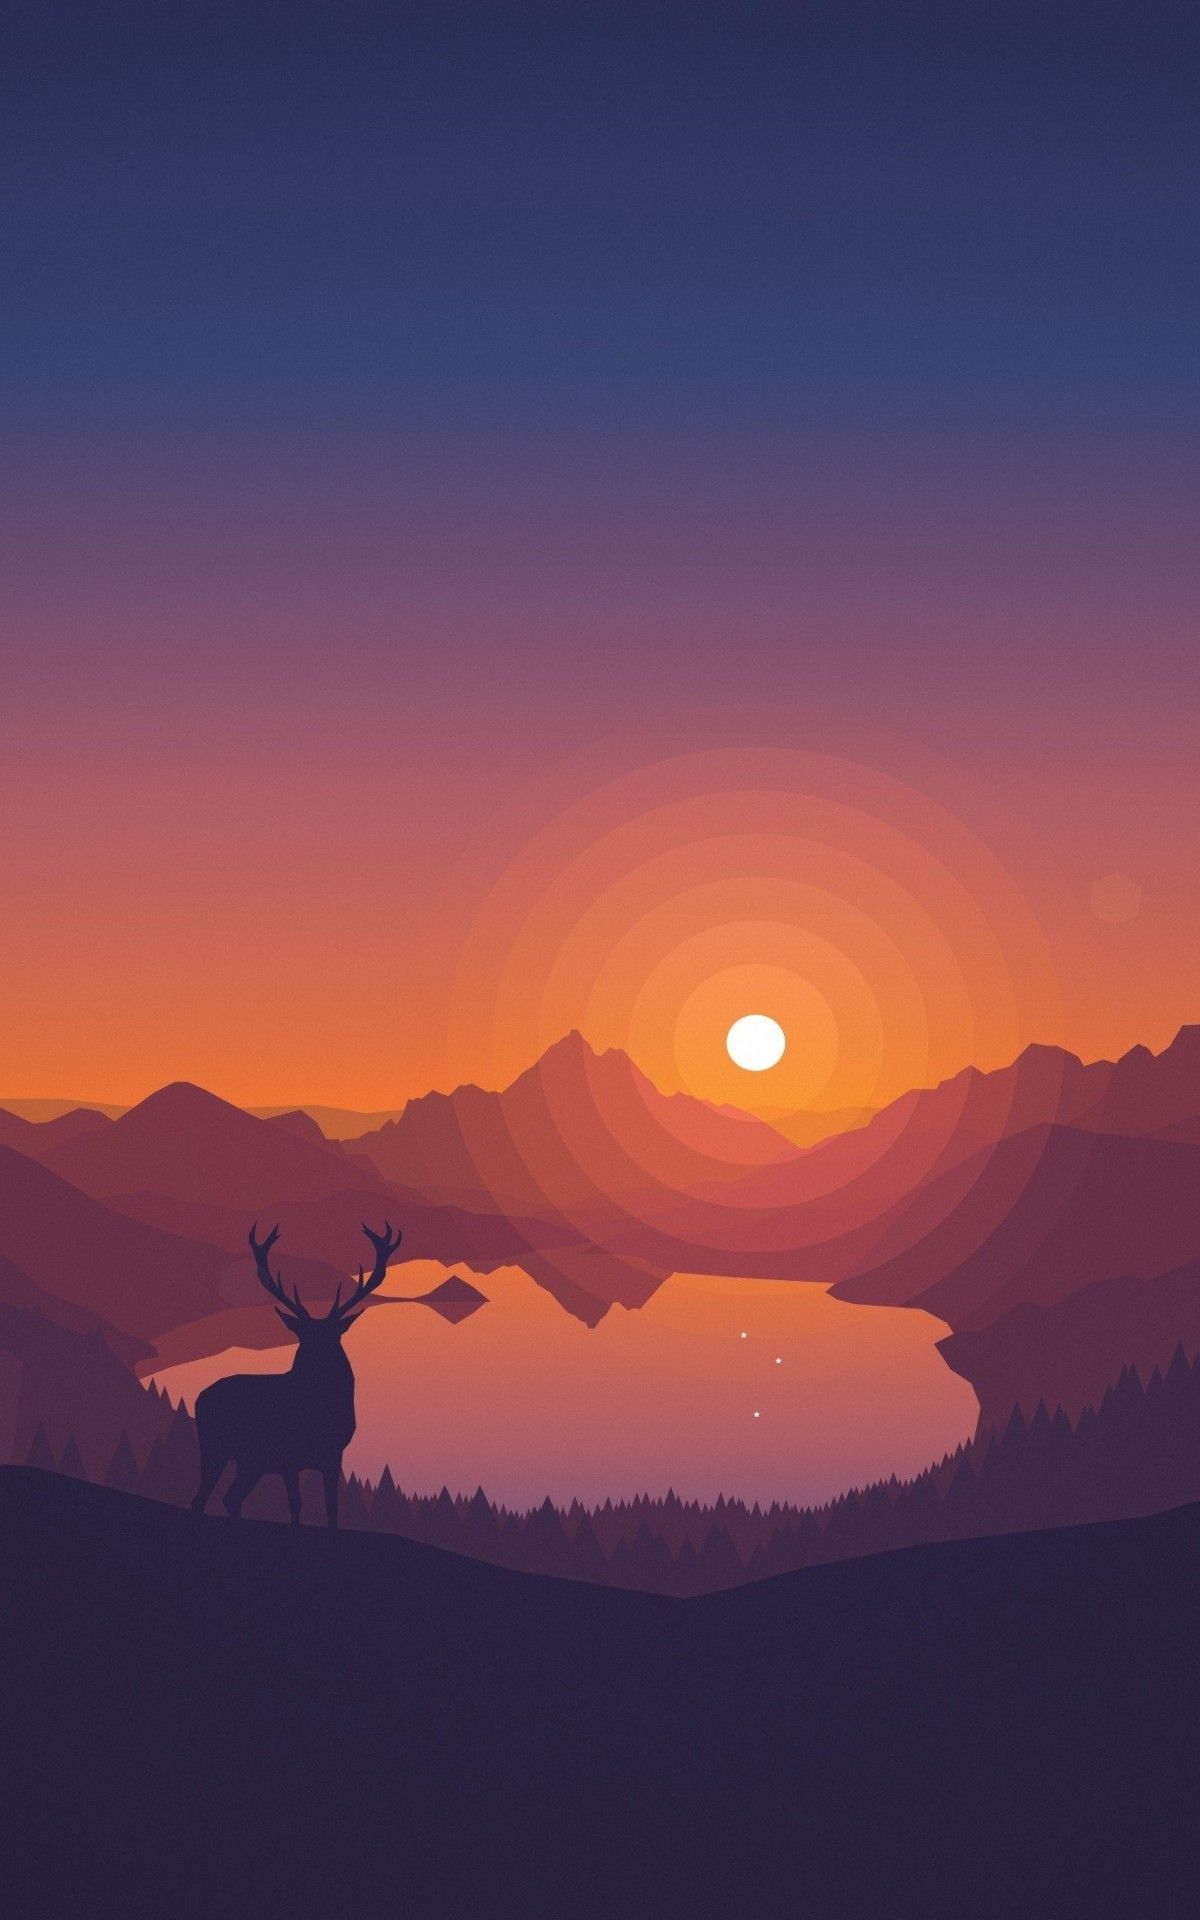 Download 1200x1920 Minimalism, Scenic, Toon Colors, Deer, Sun, Forest, Trees, Mountain Wallpaper for Asus Transformer, Asus Nexus Amazon Kindle Fire HD 8.9